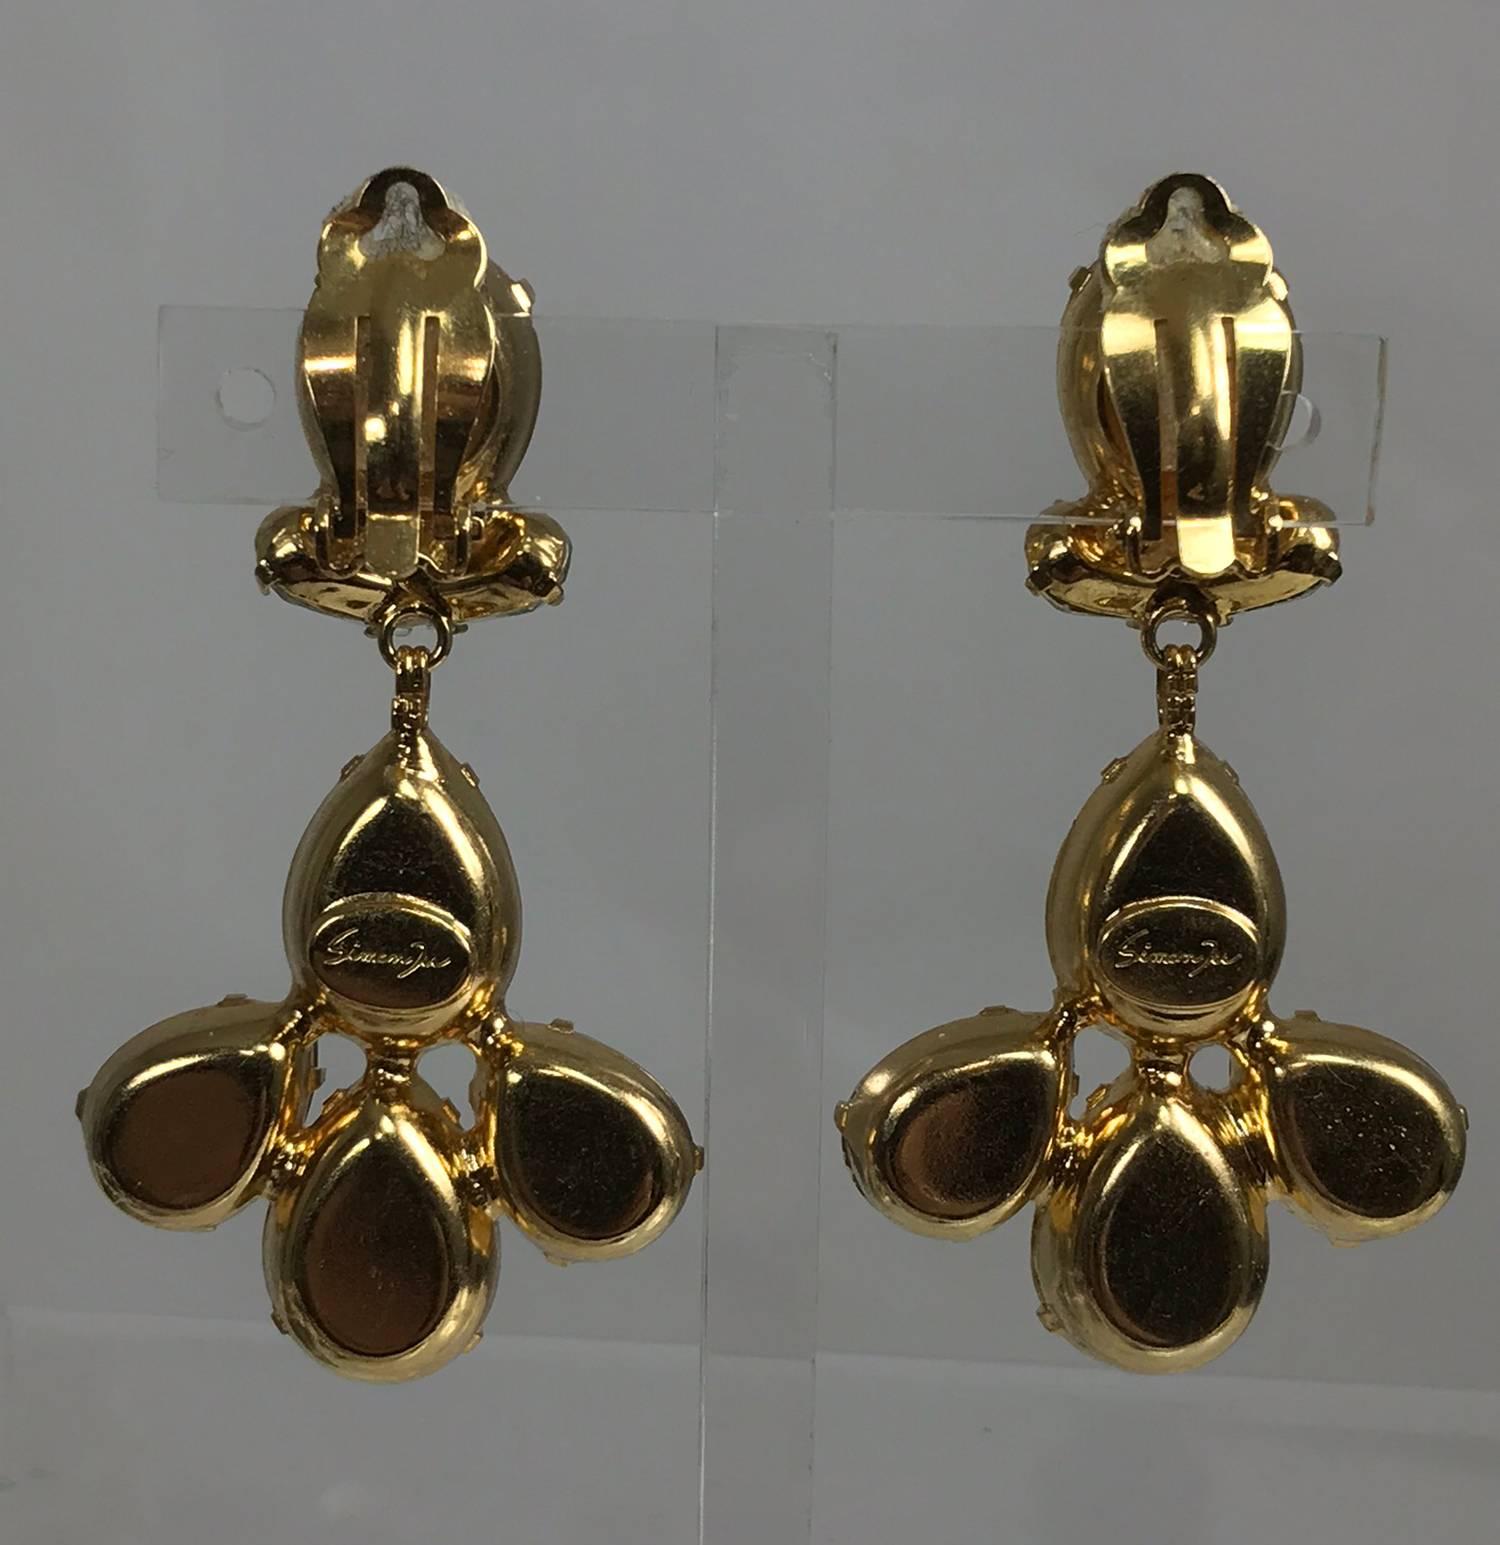 Siman Tu large icy crystal dangle earrings...Set in gold metal these earrings are amazing and really sparkle...Approximately 2 1/2